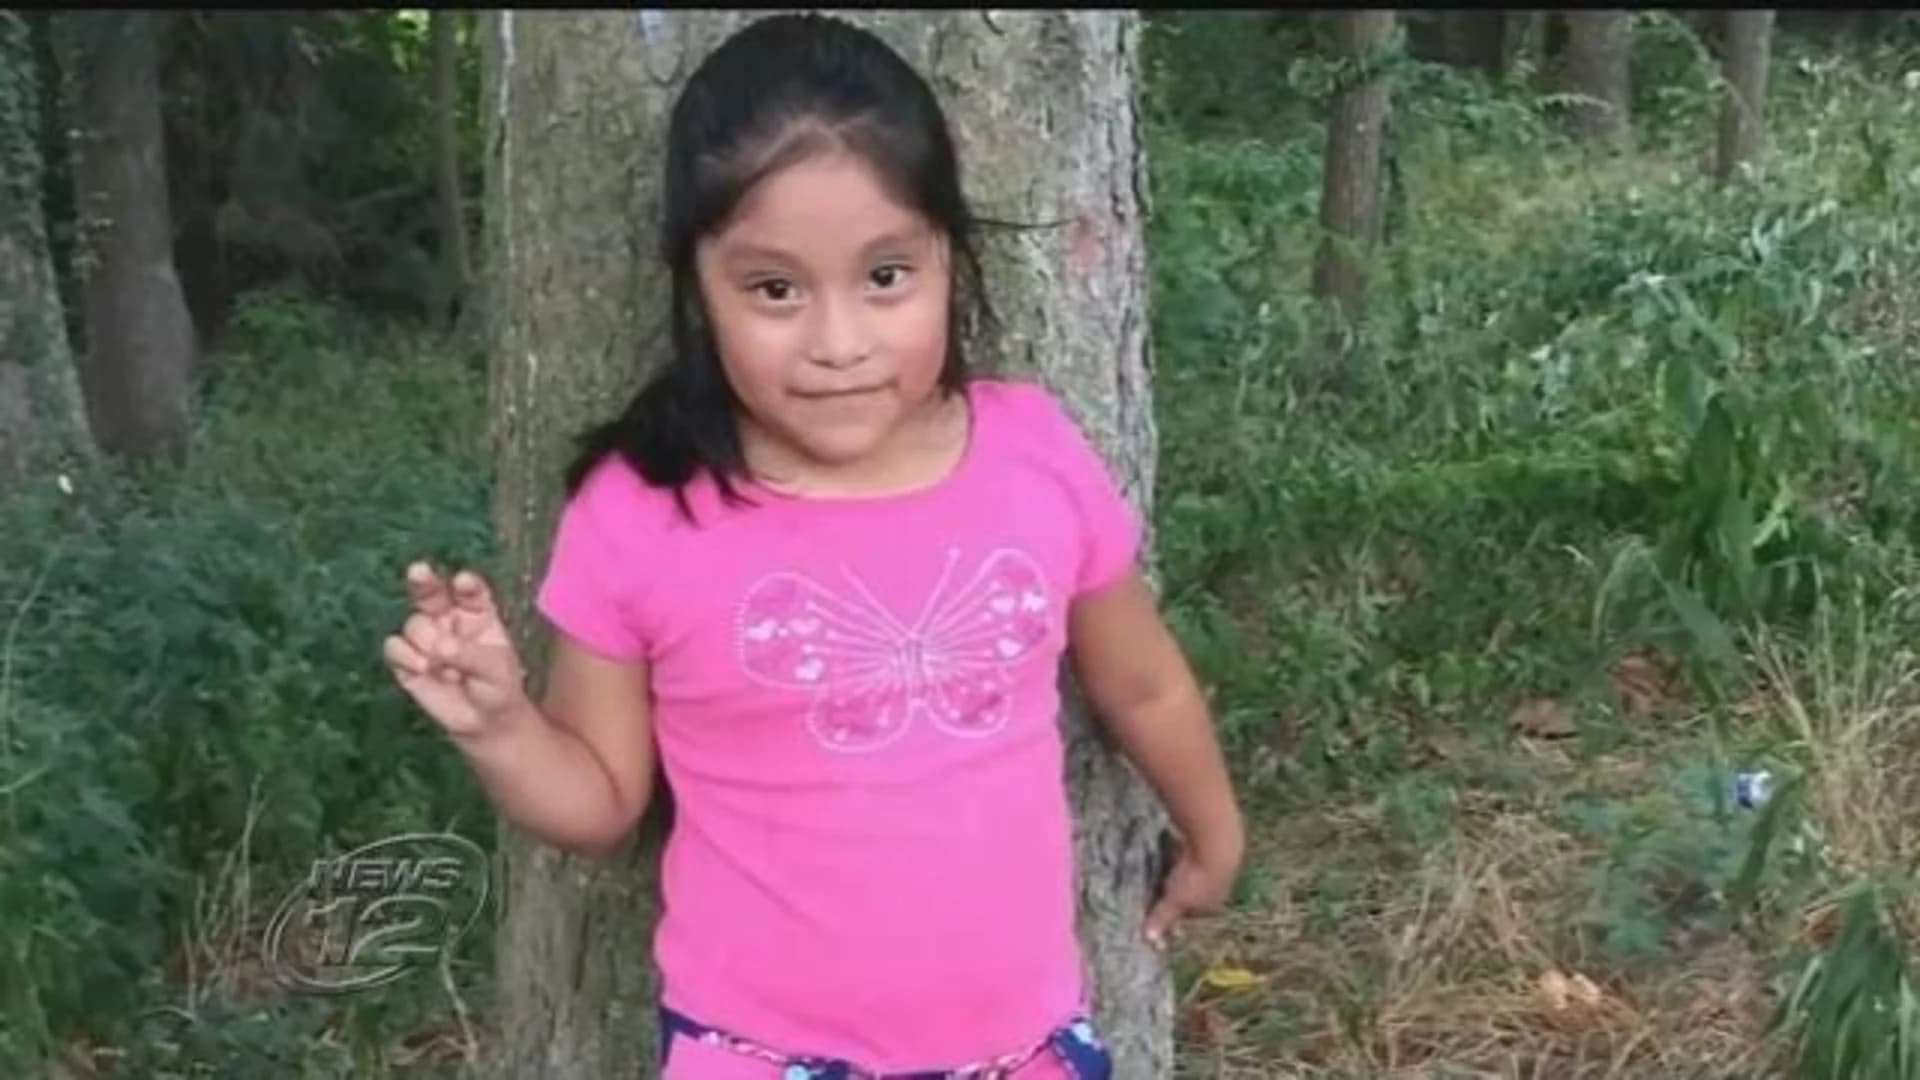 State AG: Don’t be afraid to talk to police about missing Bridgeton girl